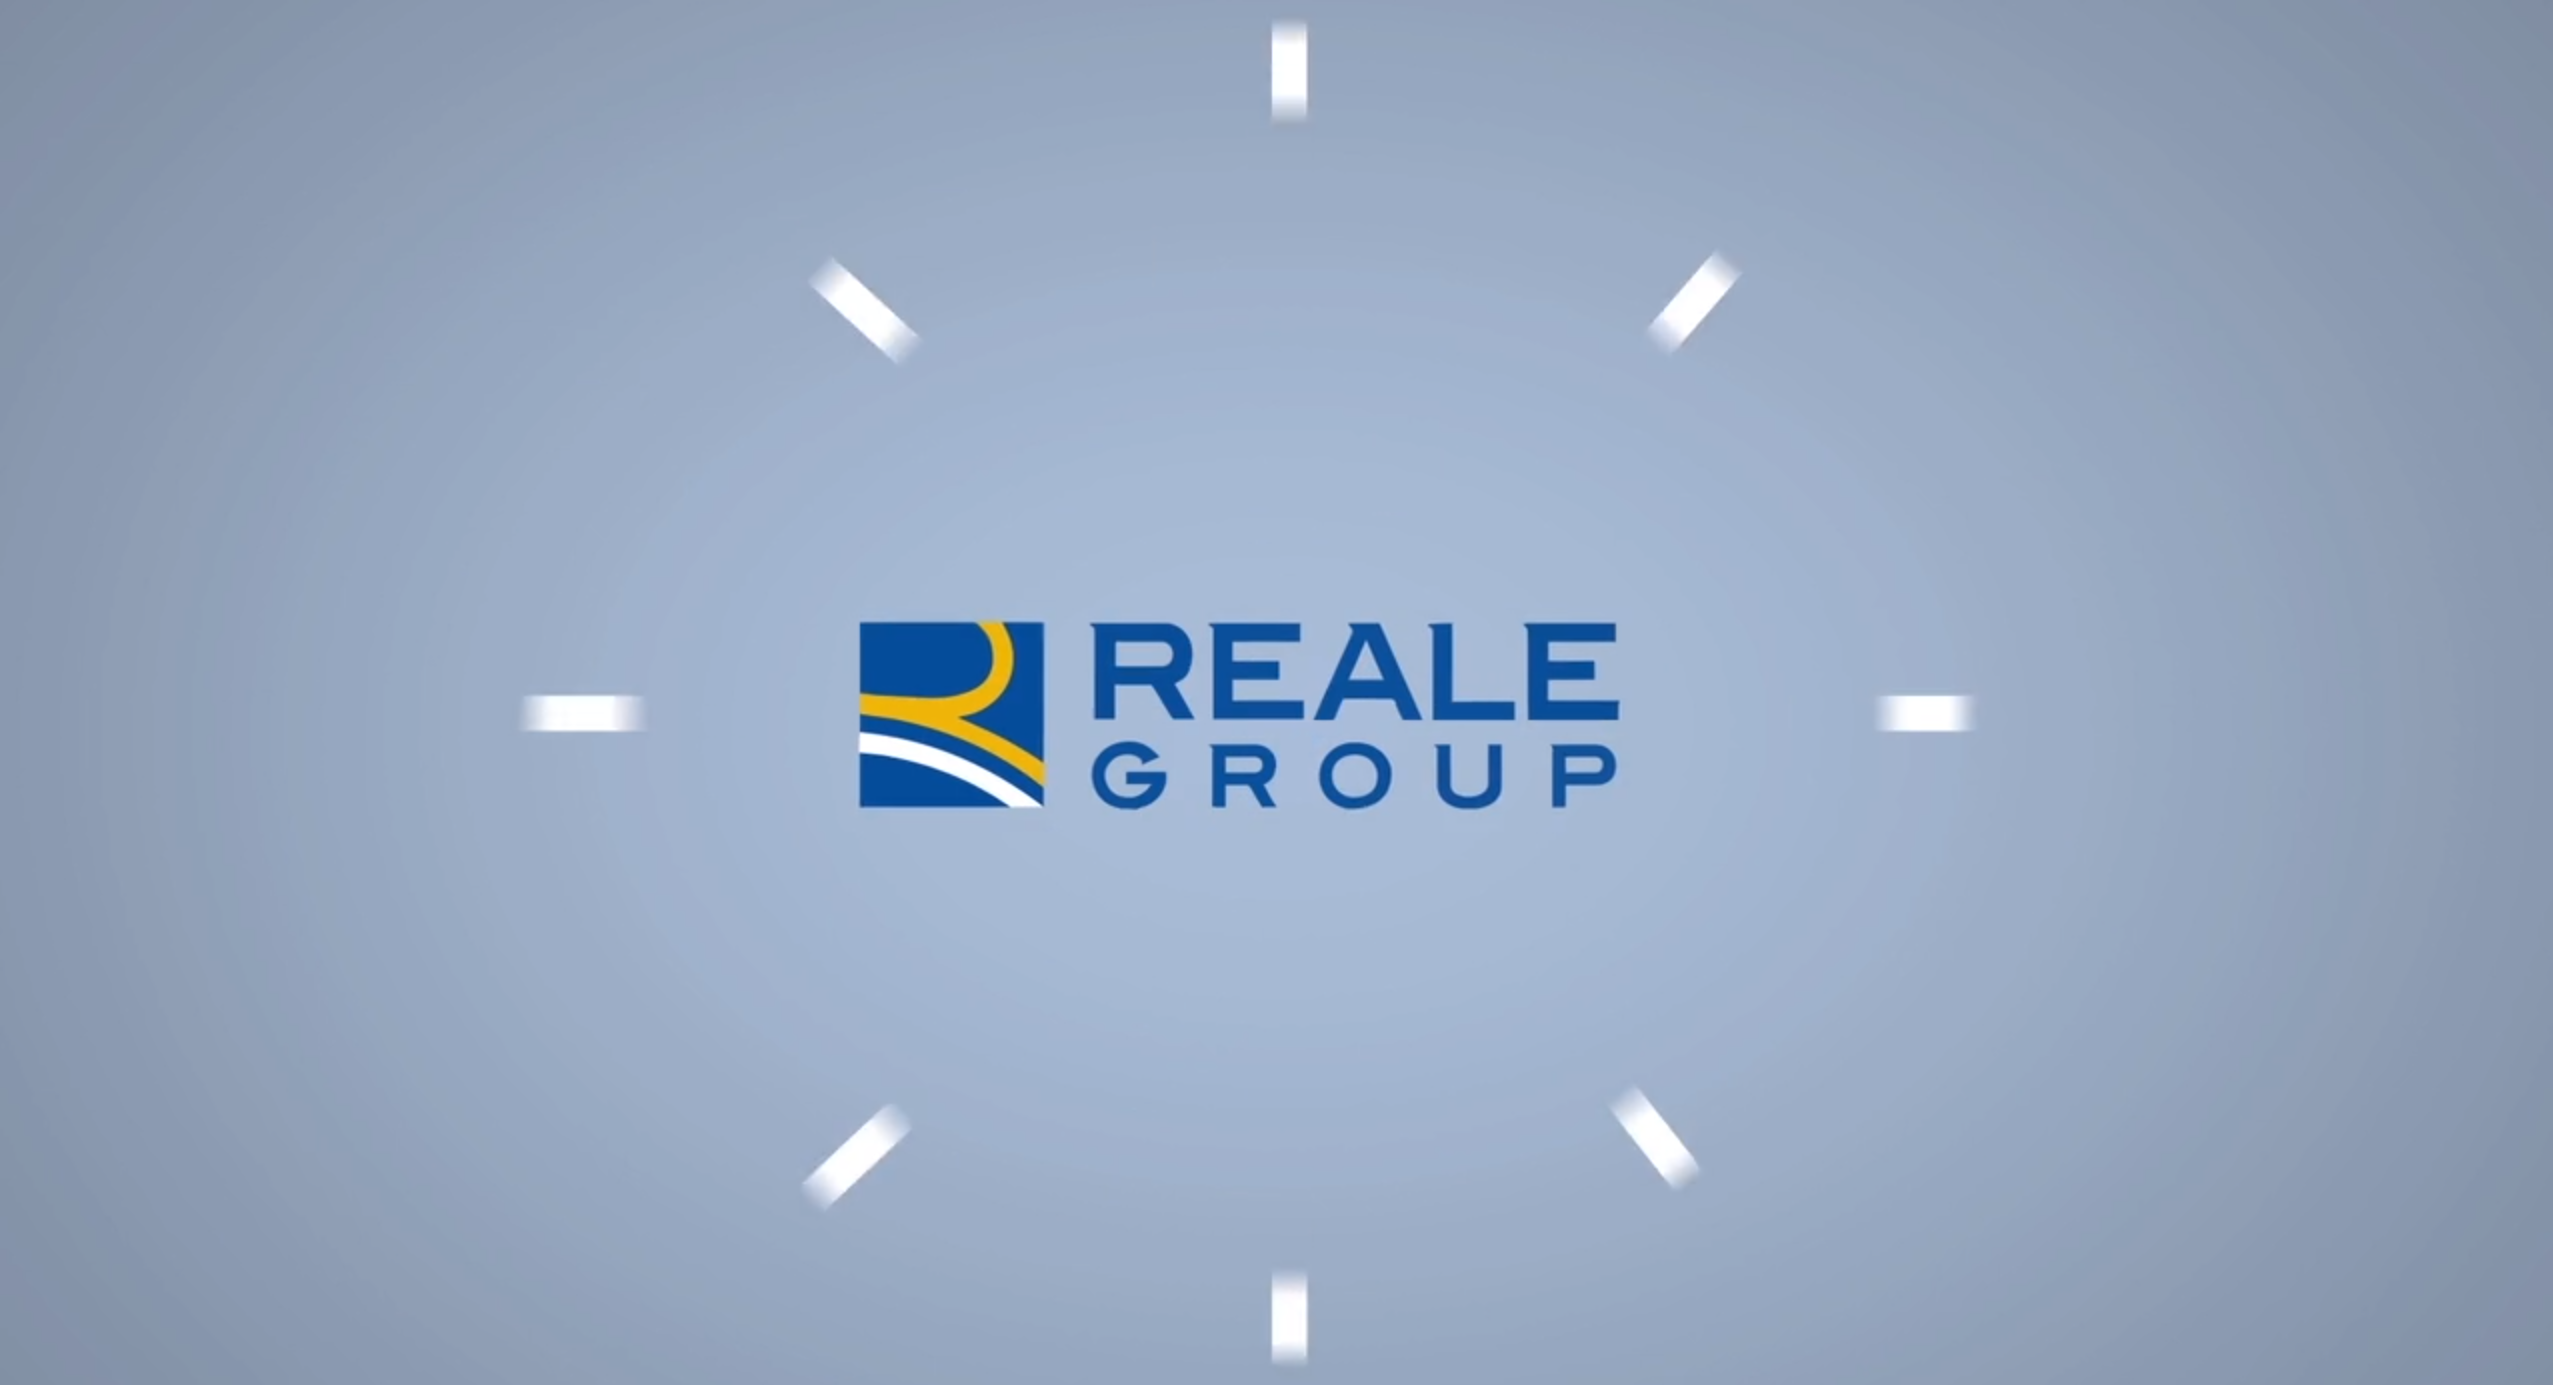 REALE GROUP